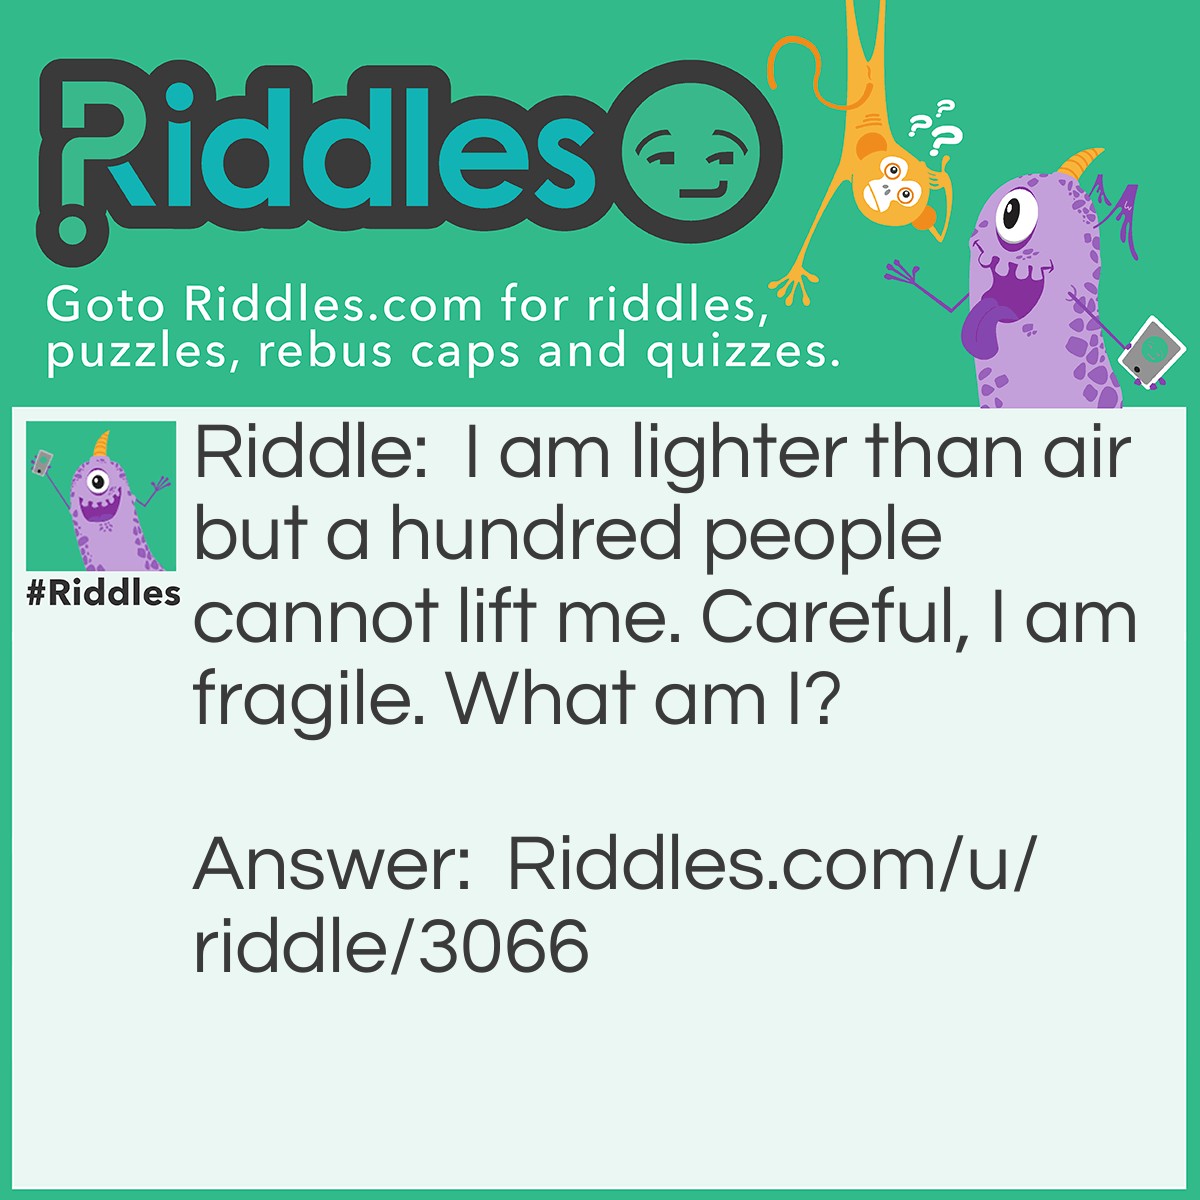 Riddle: I am lighter than air but a hundred people cannot lift me. Careful, I am fragile. What am I? Answer: Bubbles.